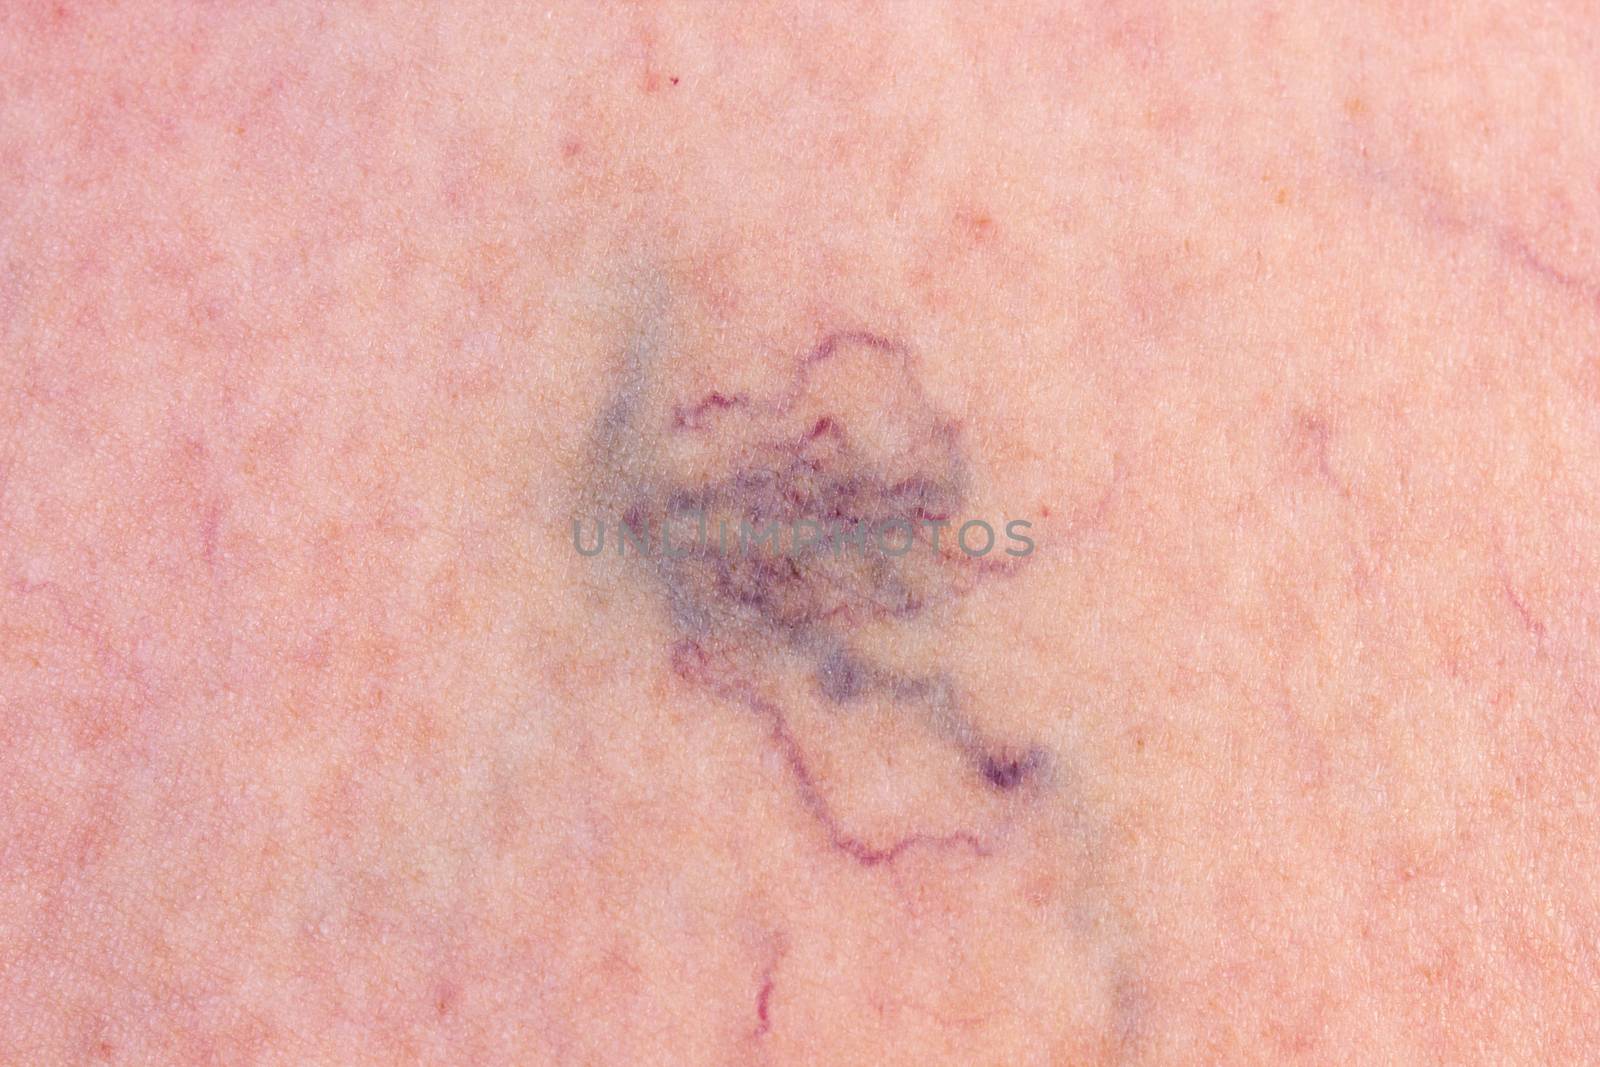 Dermis with varicose veins by gwolters